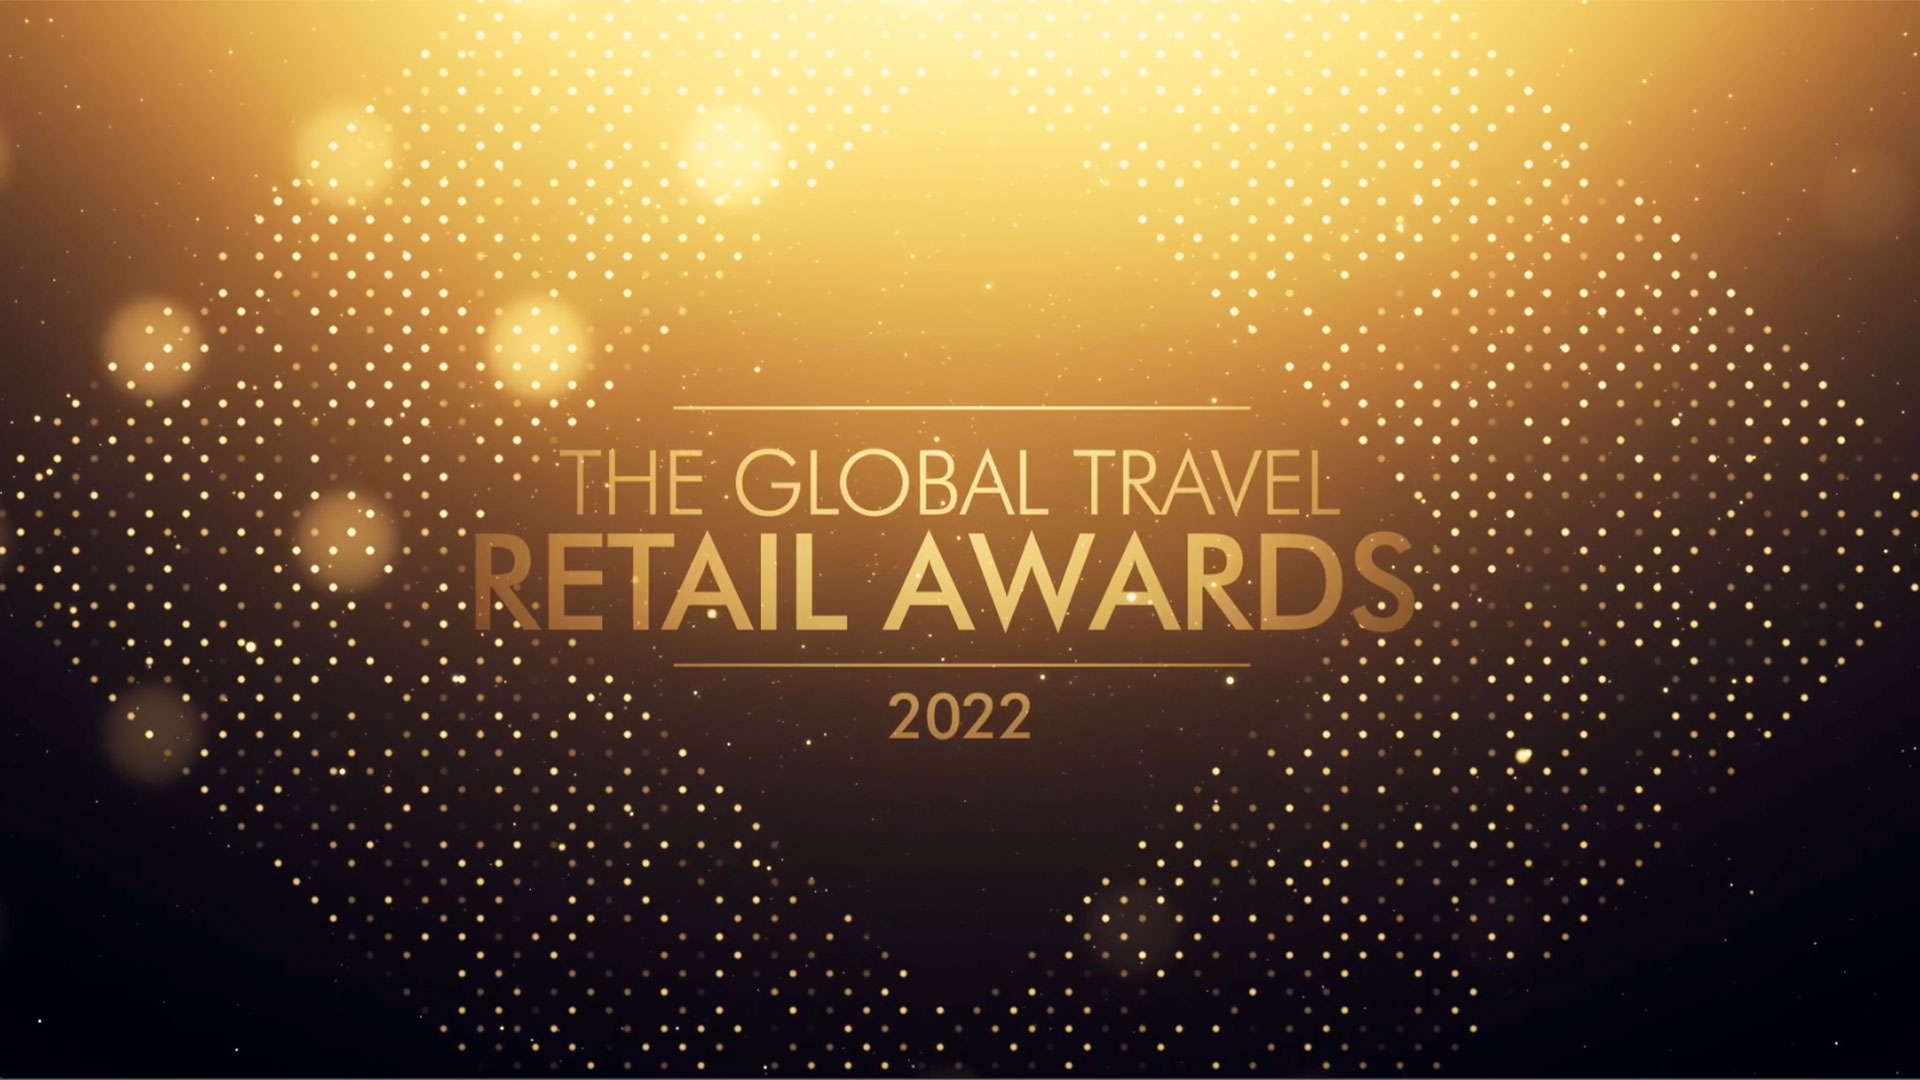 The Global Travel Retail Awards 2022